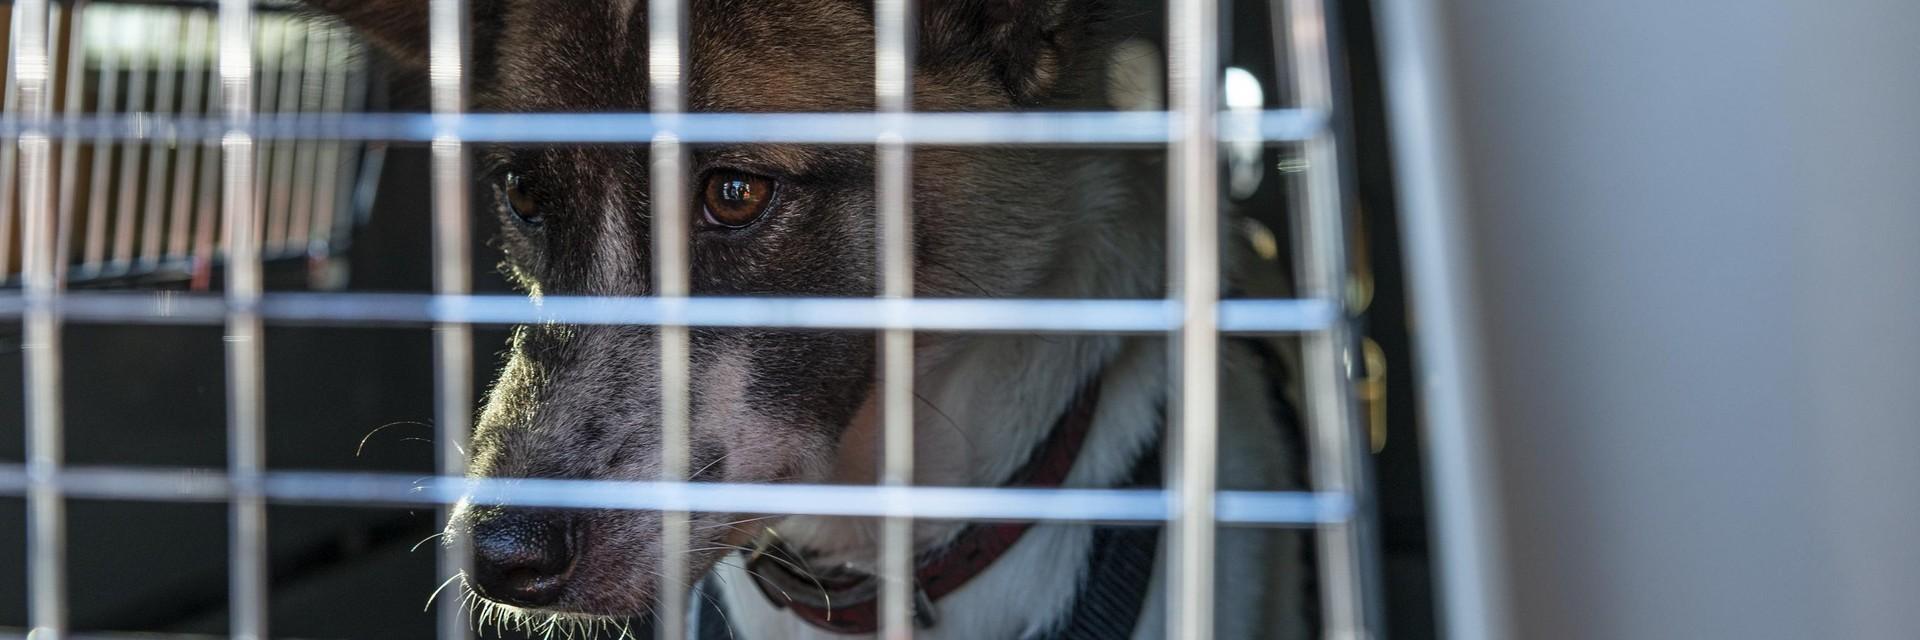 Dog in transport crate